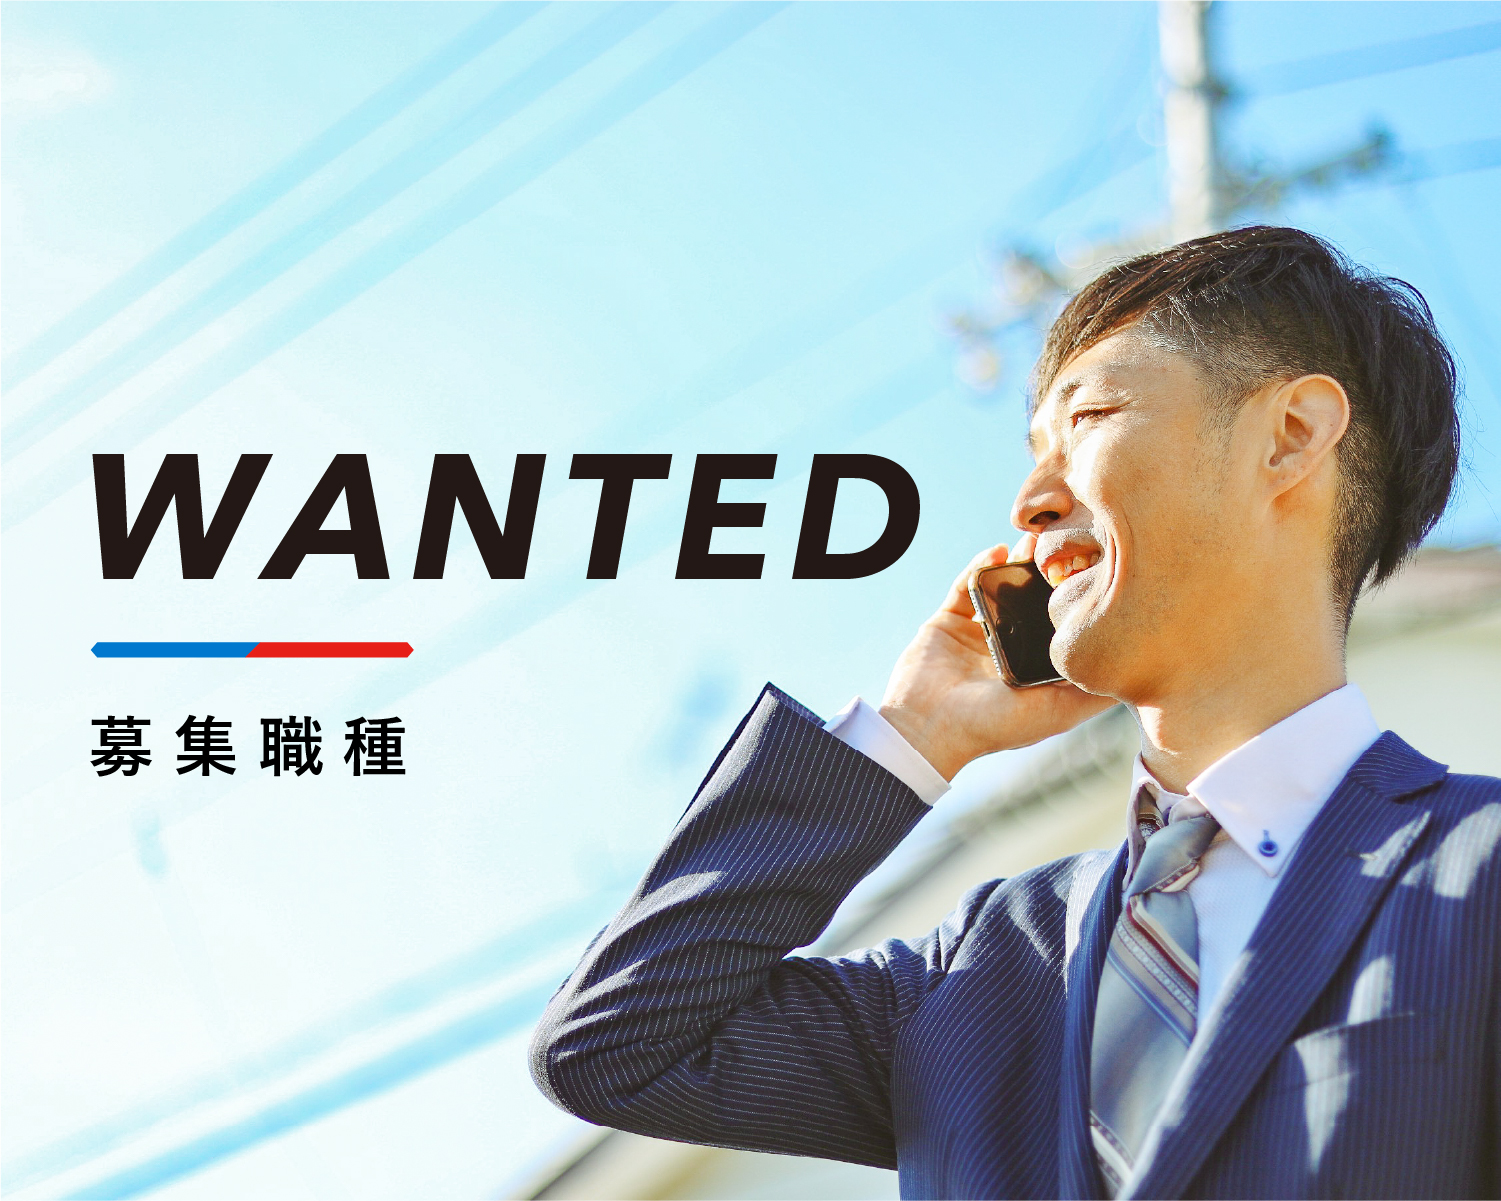 WANTED：募集職種